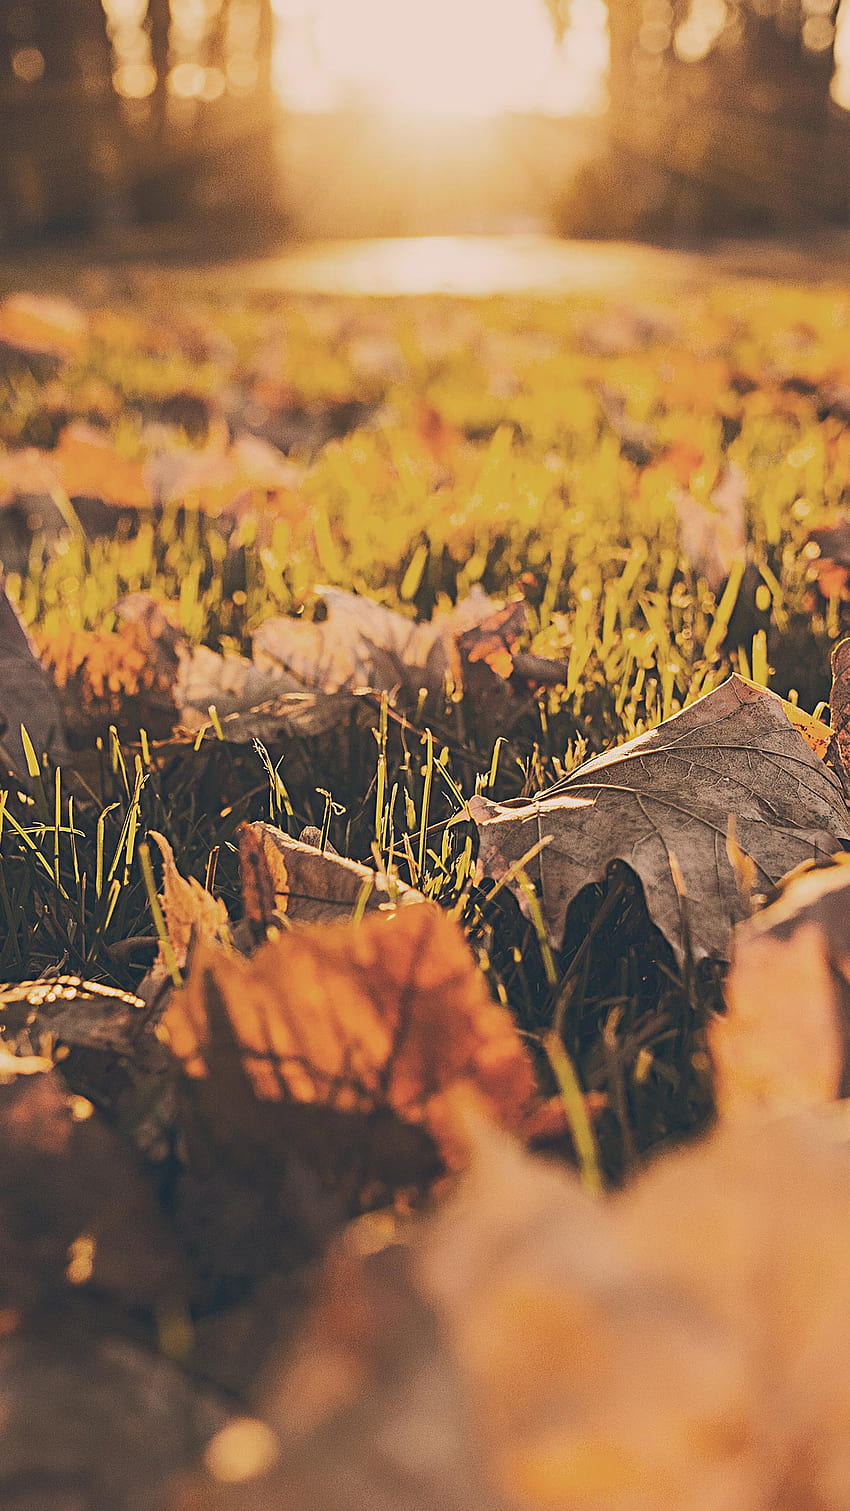 Fall Aesthetic posted by Michelle Anderson, aesthetic vintage autumn HD phone wallpaper